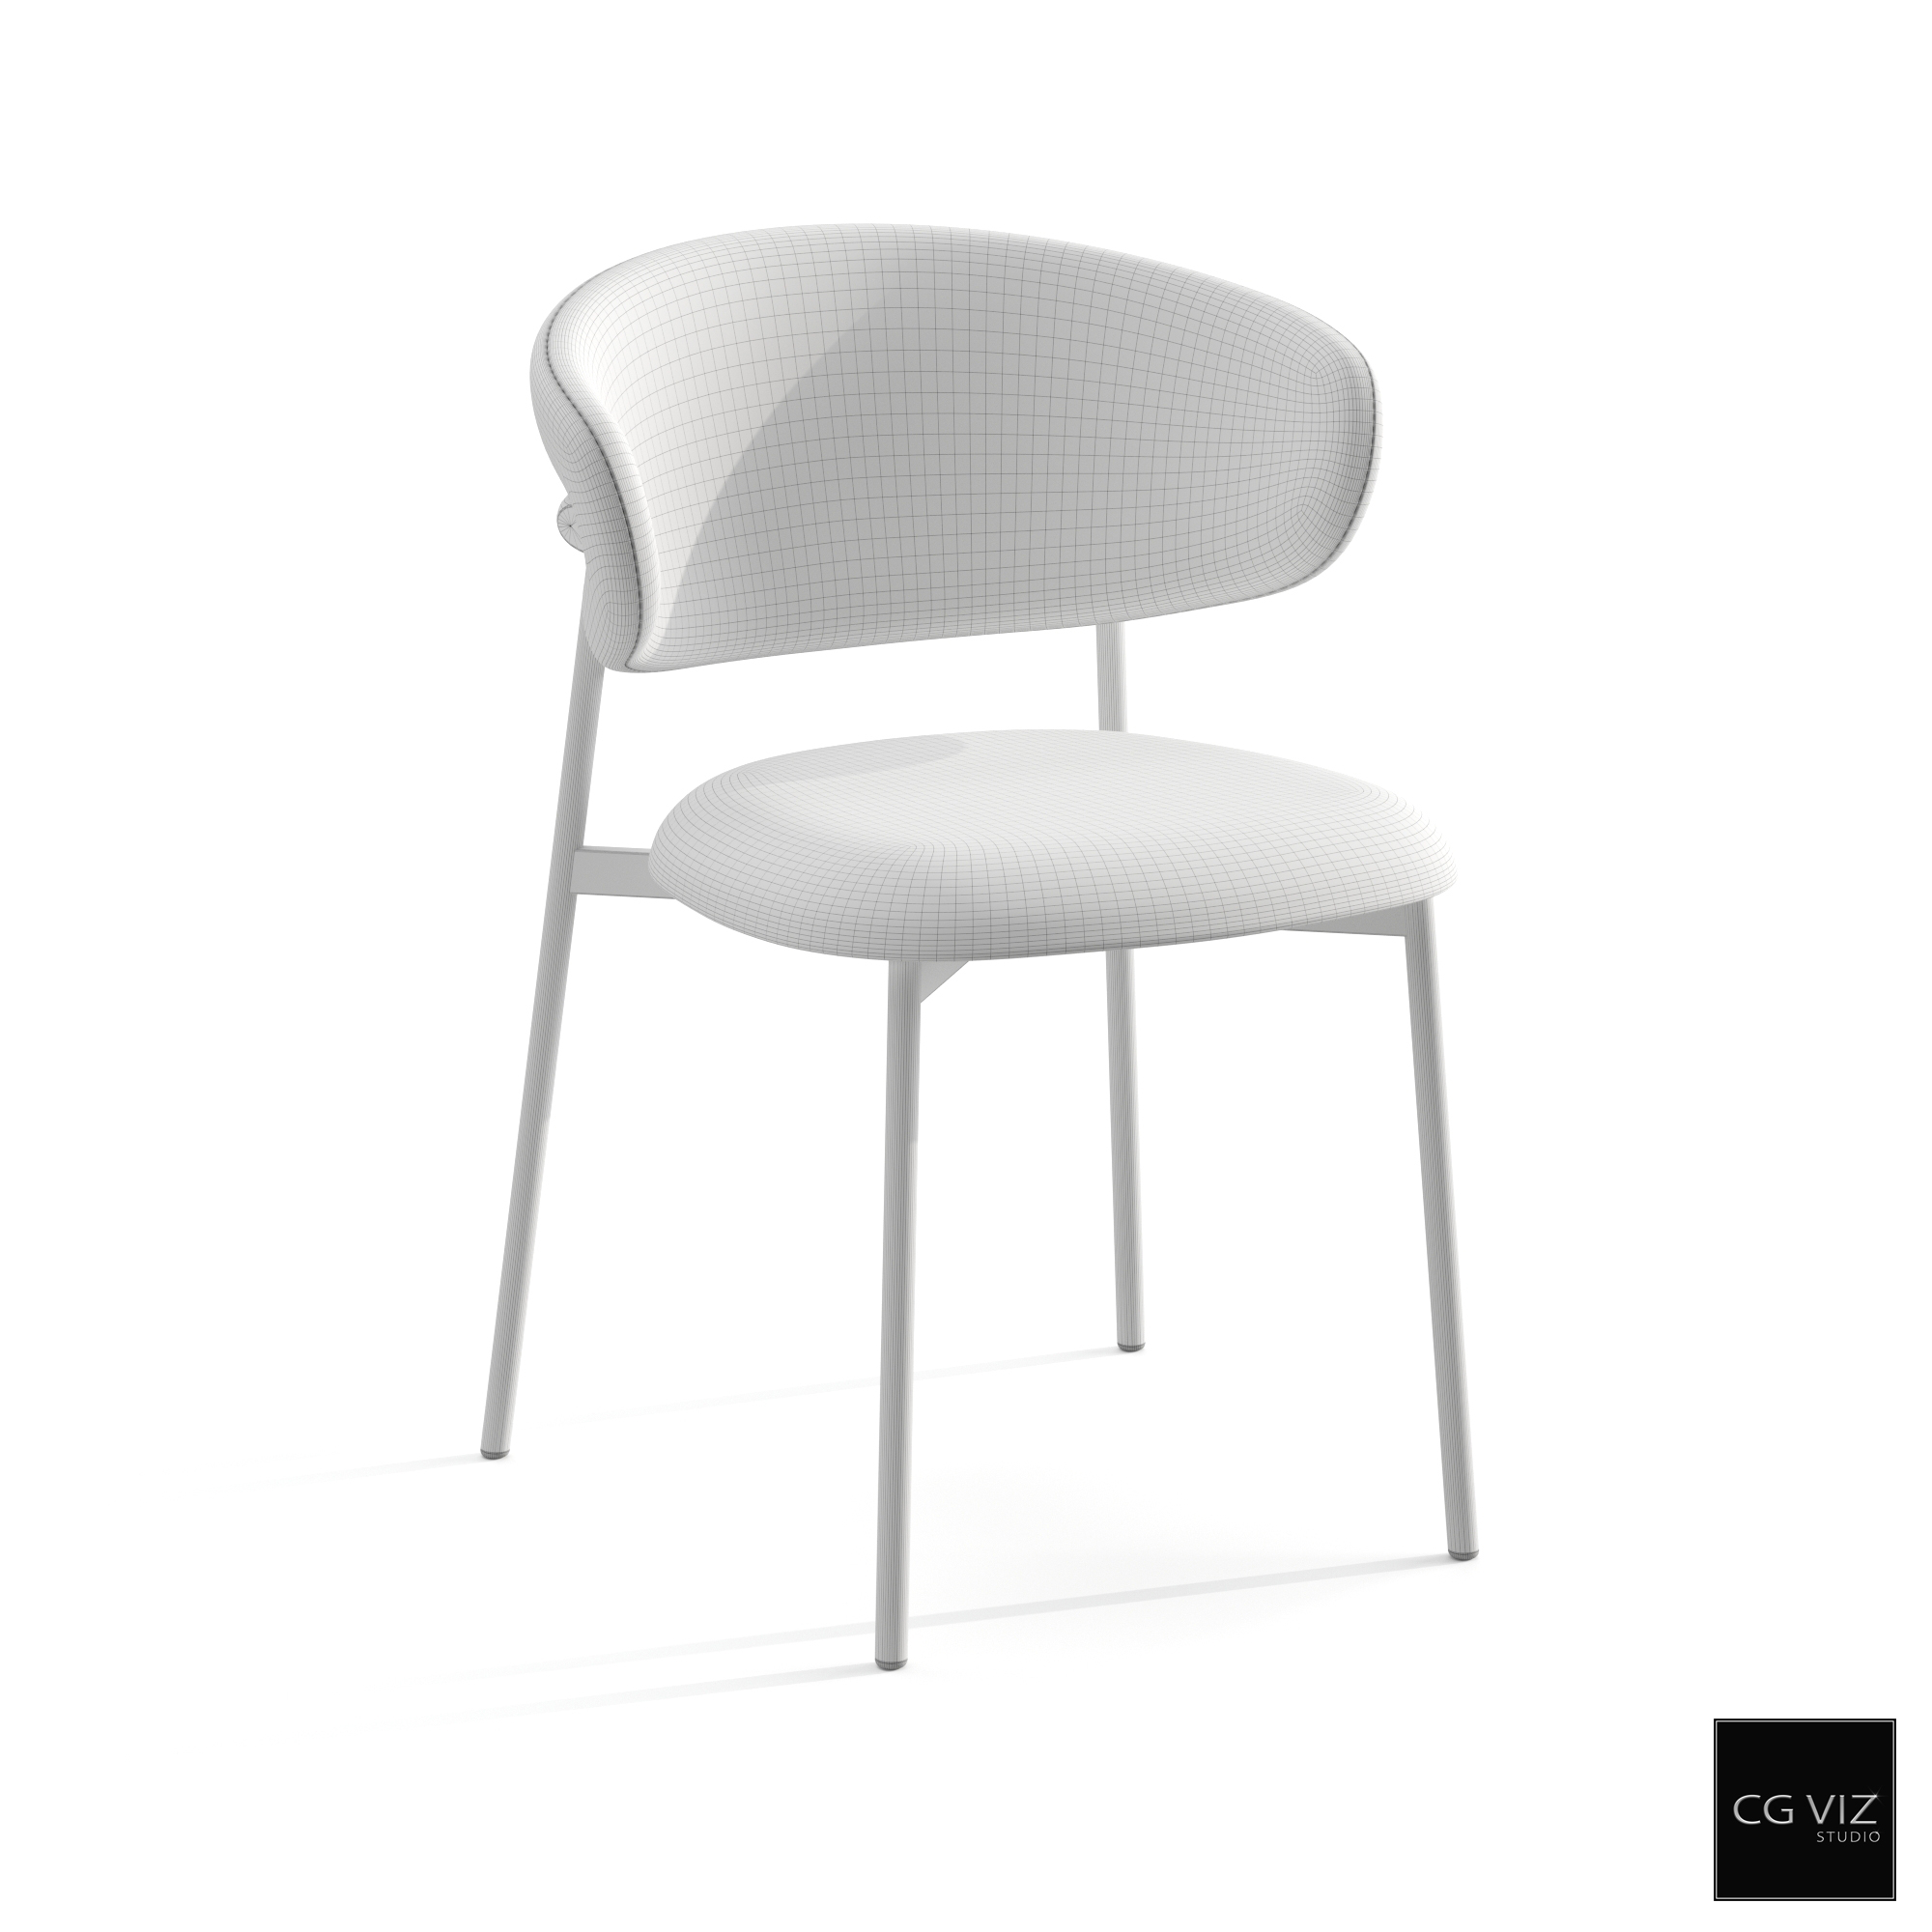 Wireframe View of Calligaris Oleandro Chair 3D Model